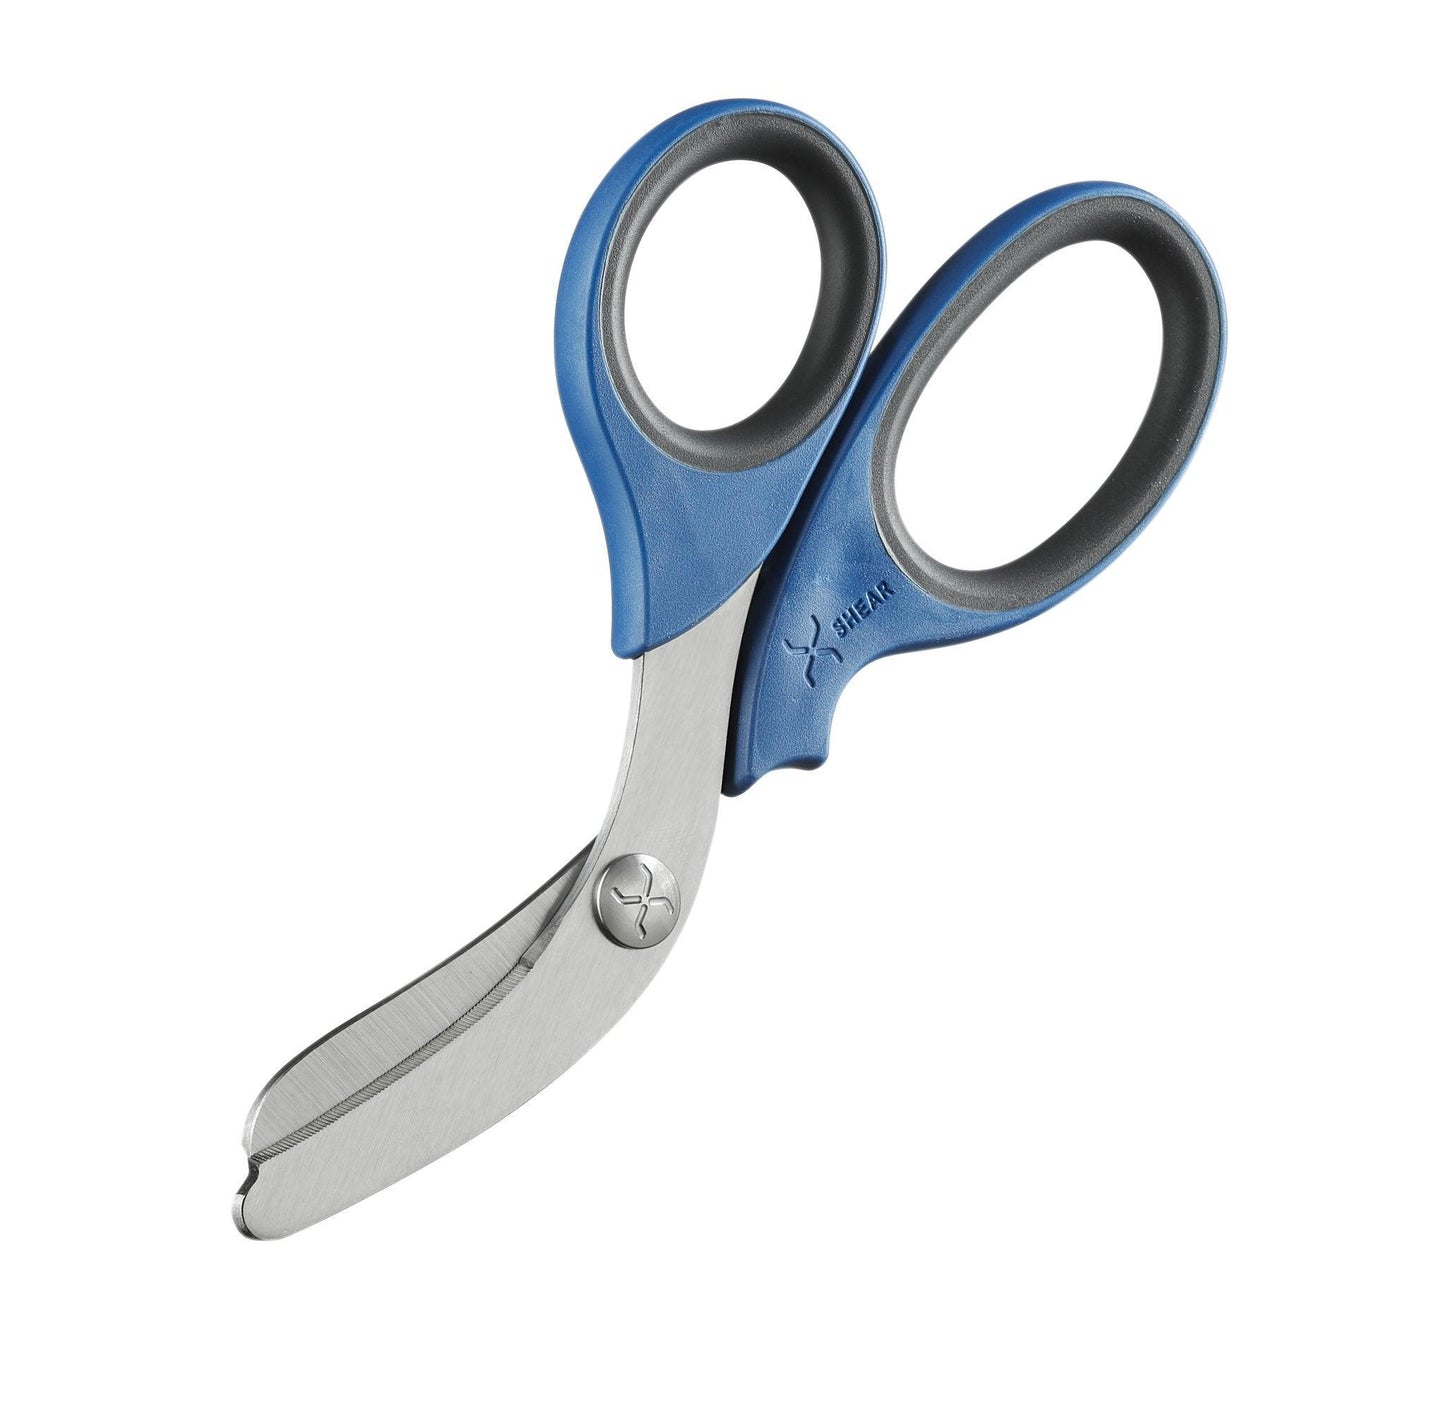 XSHEAR Heavy Duty Trauma Shears with Stainless Steel Uncoated Blades, 7.5" - First Aid Plus 